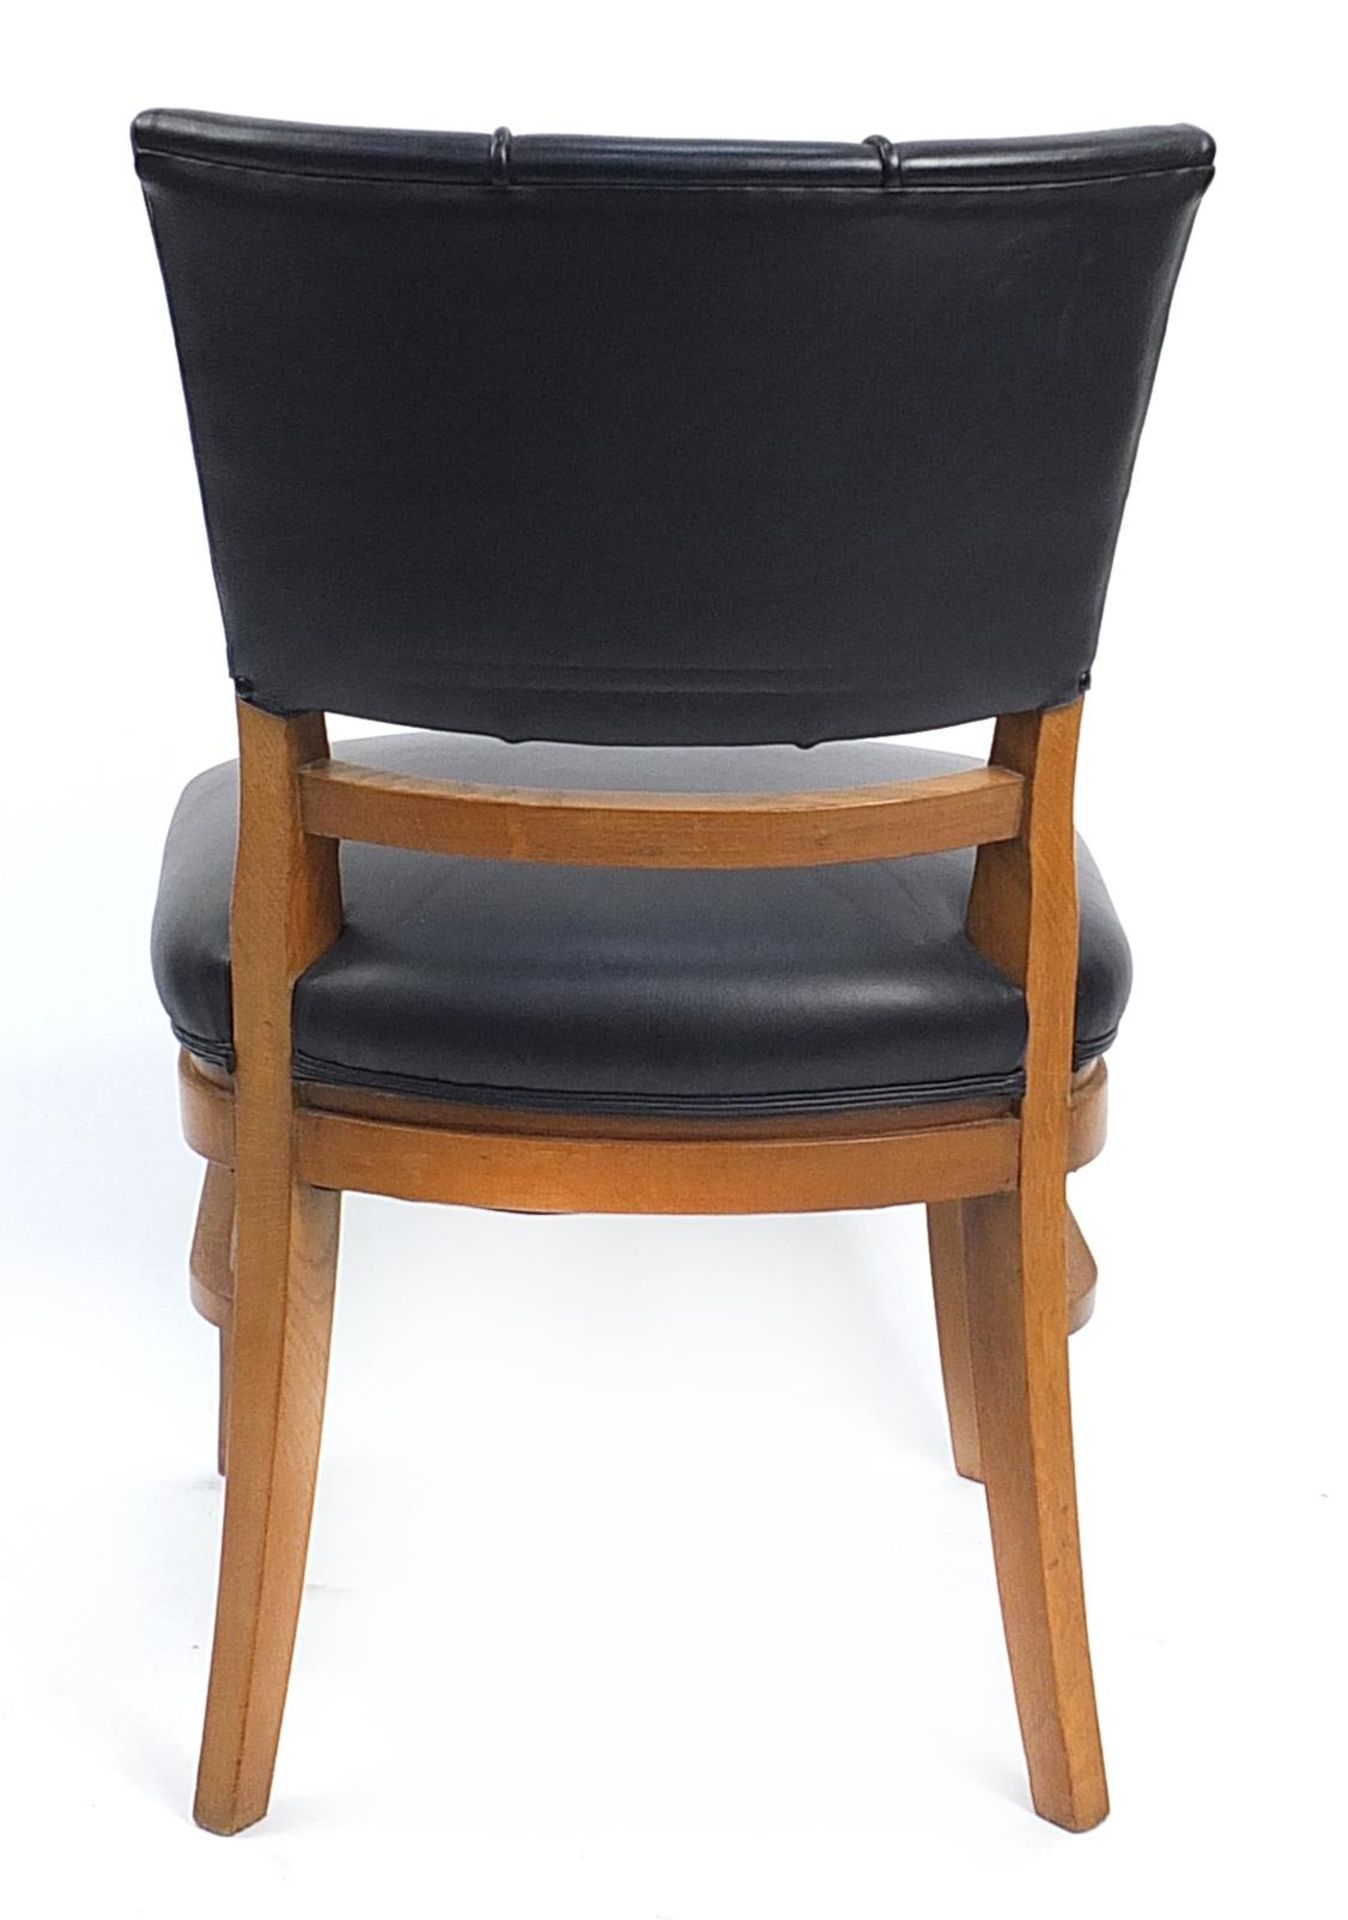 Art Deco fan design oak framed chair with black leather upholstery, 85.5cm high - Image 3 of 3